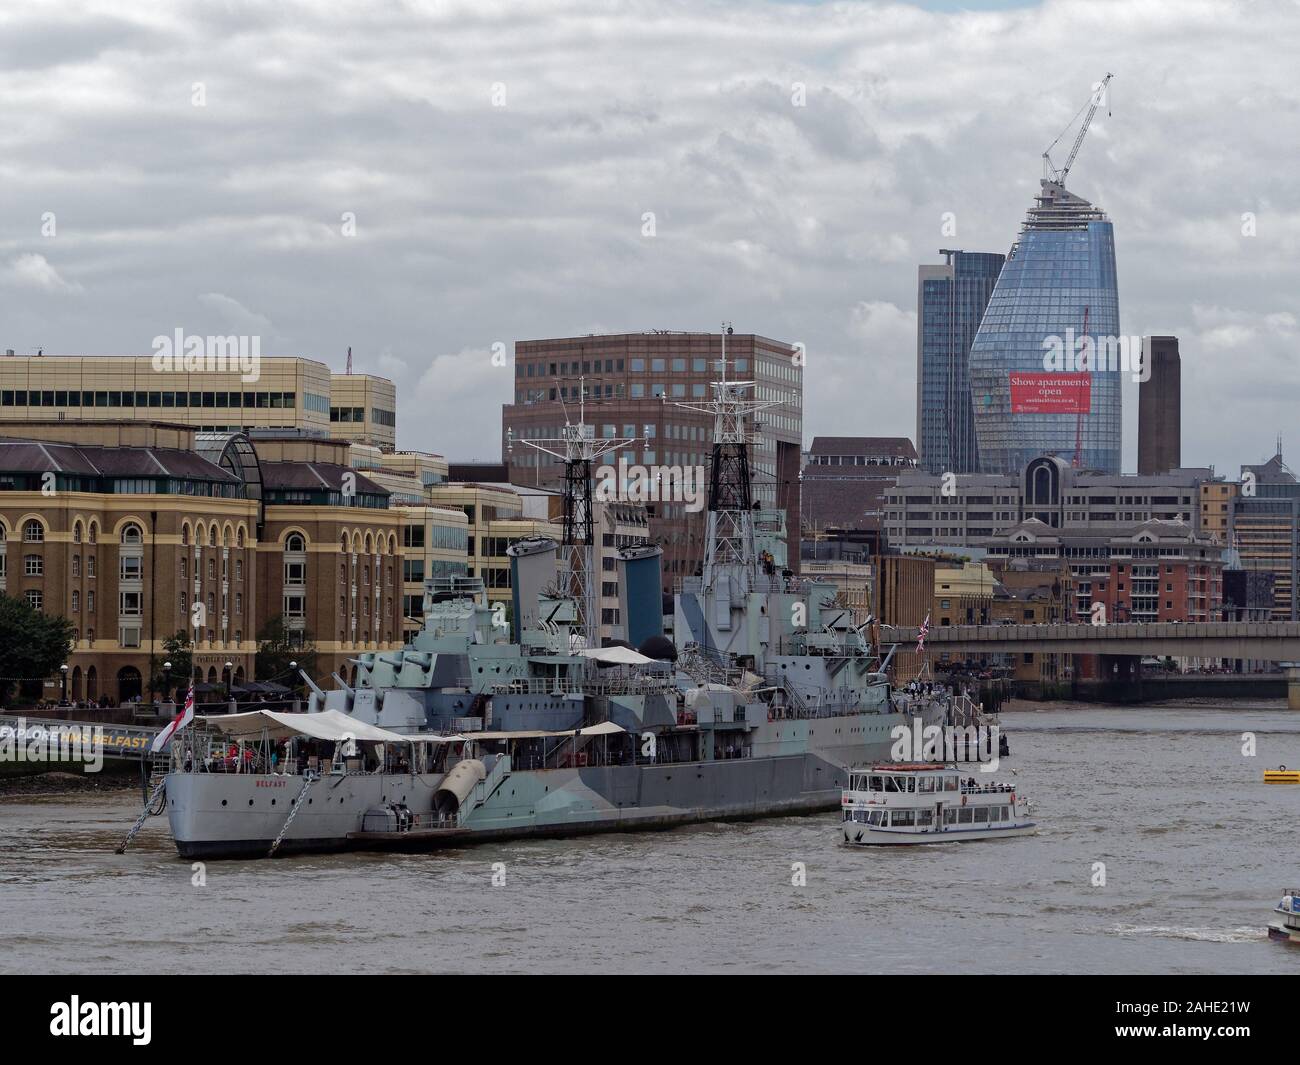 Museum ship light cruiser HMS Belfast on Thames River in front of Hay's Galleria in Southwark, with London Bridge and skyscrapers in the background. Stock Photo